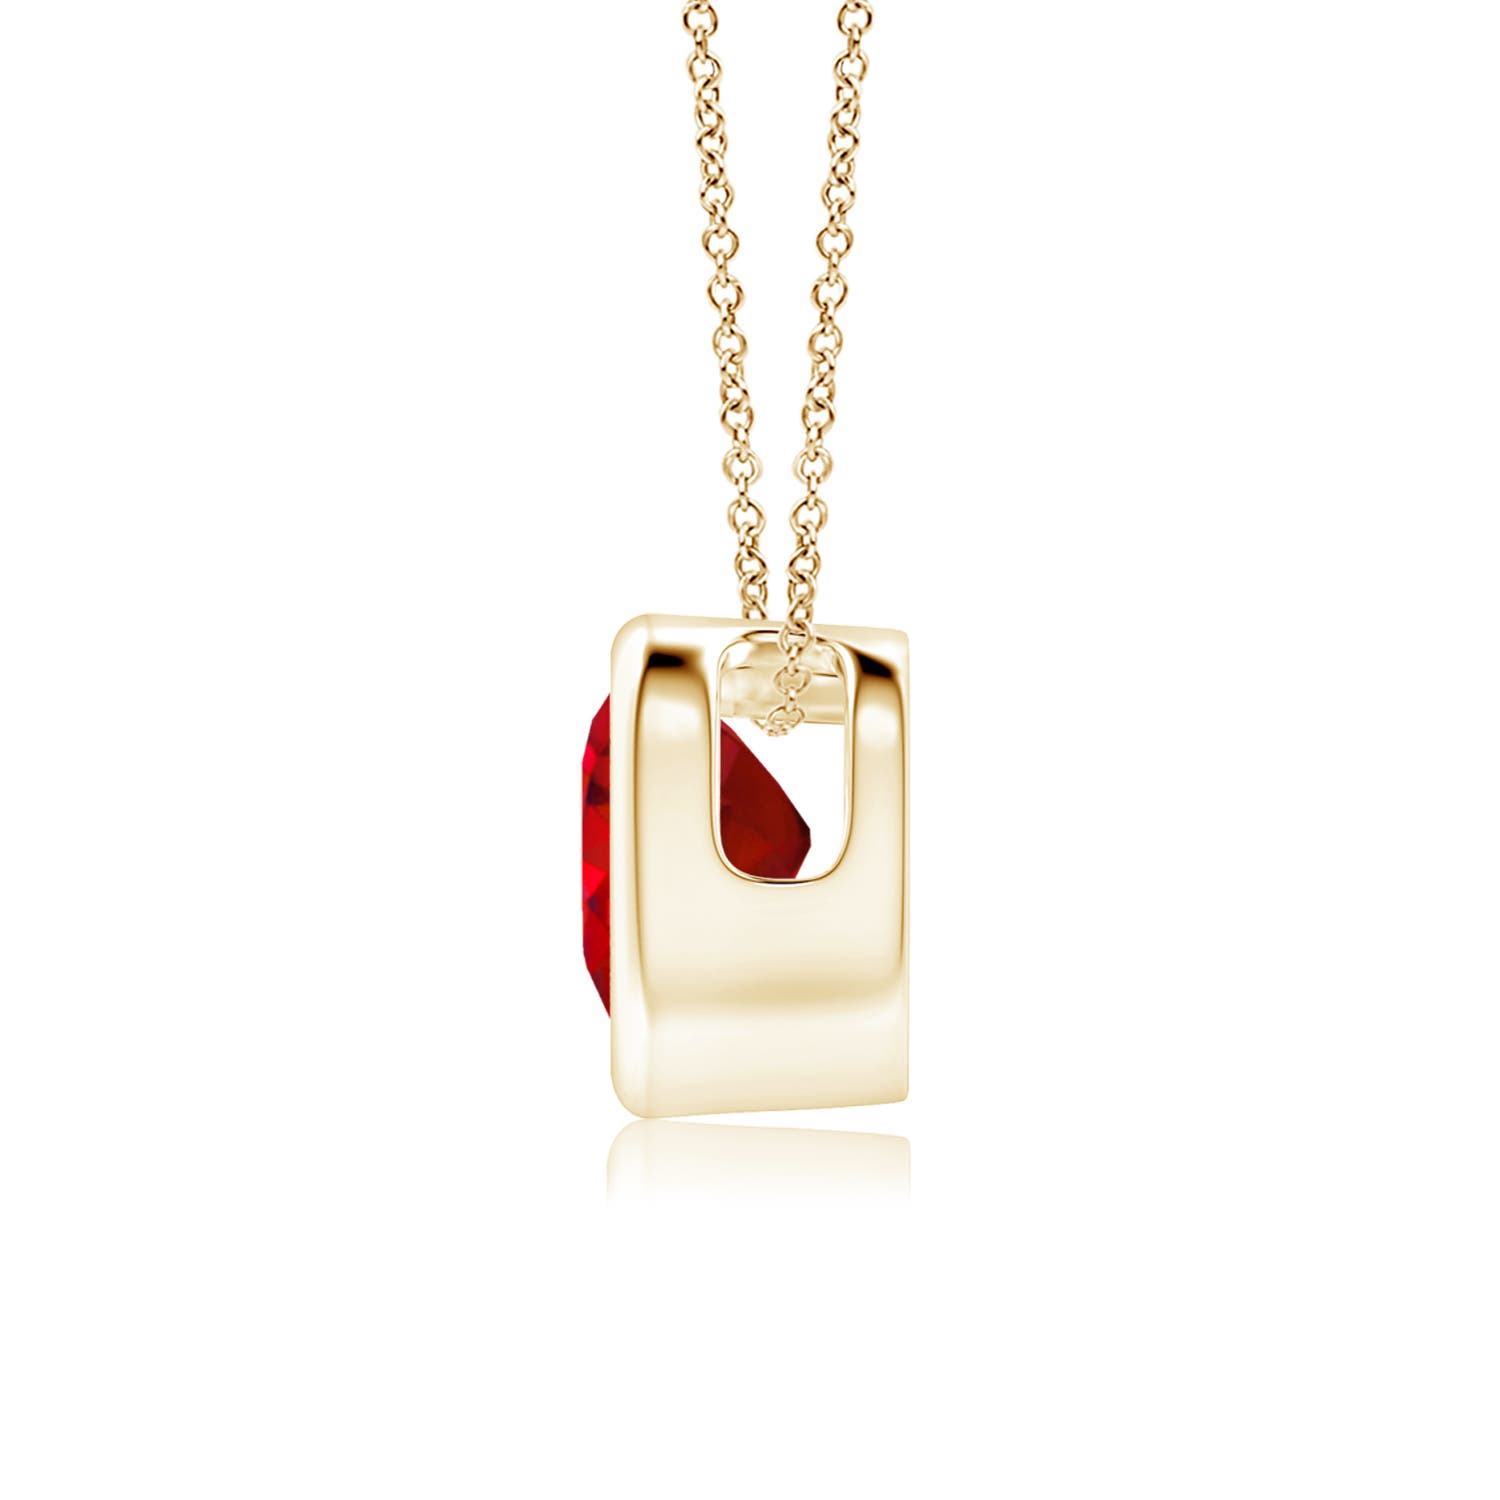 AAA - Ruby / 0.55 CT / 14 KT Yellow Gold